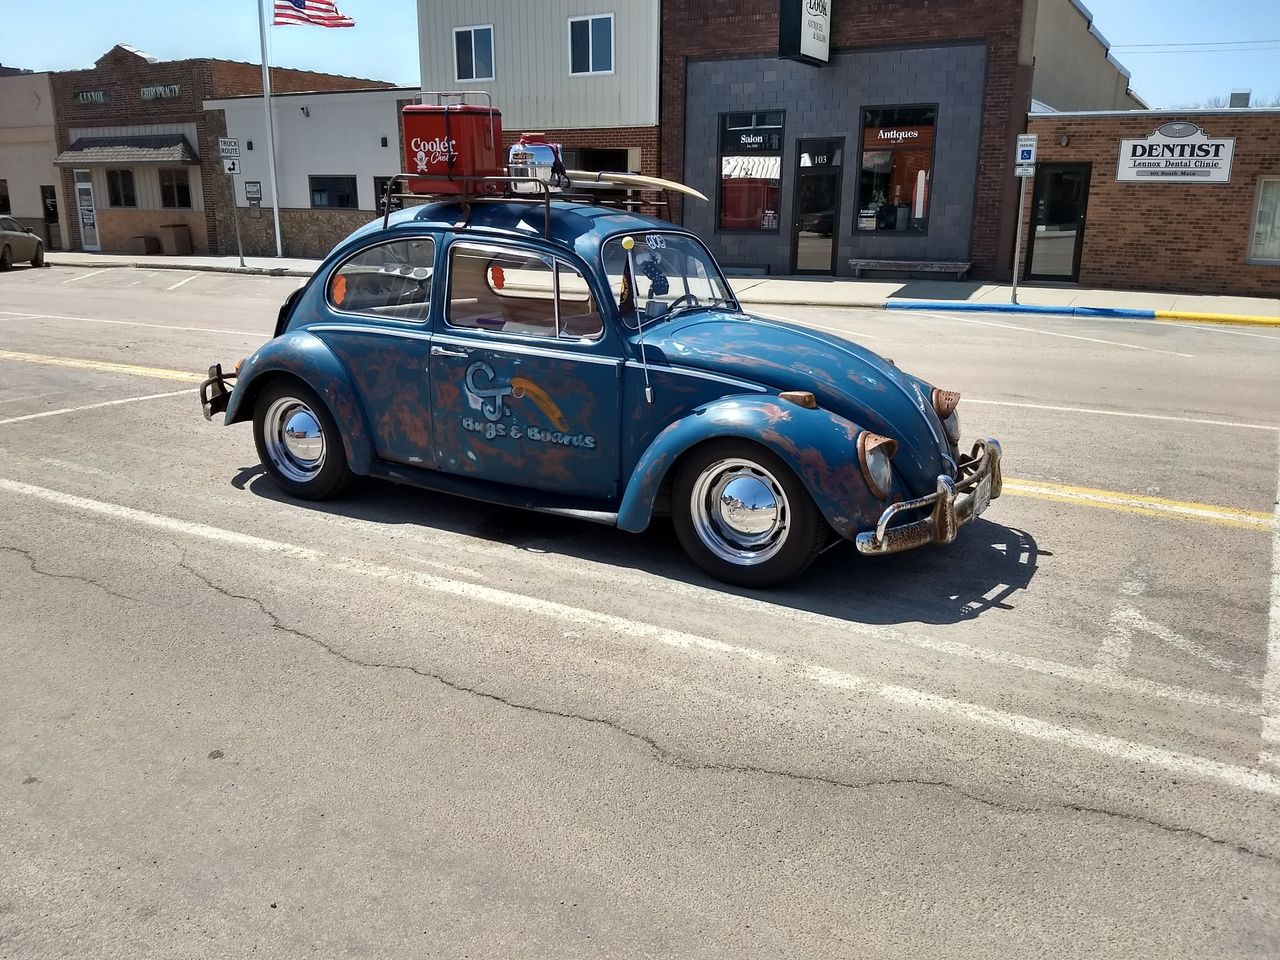 Spotted this sweet VW.